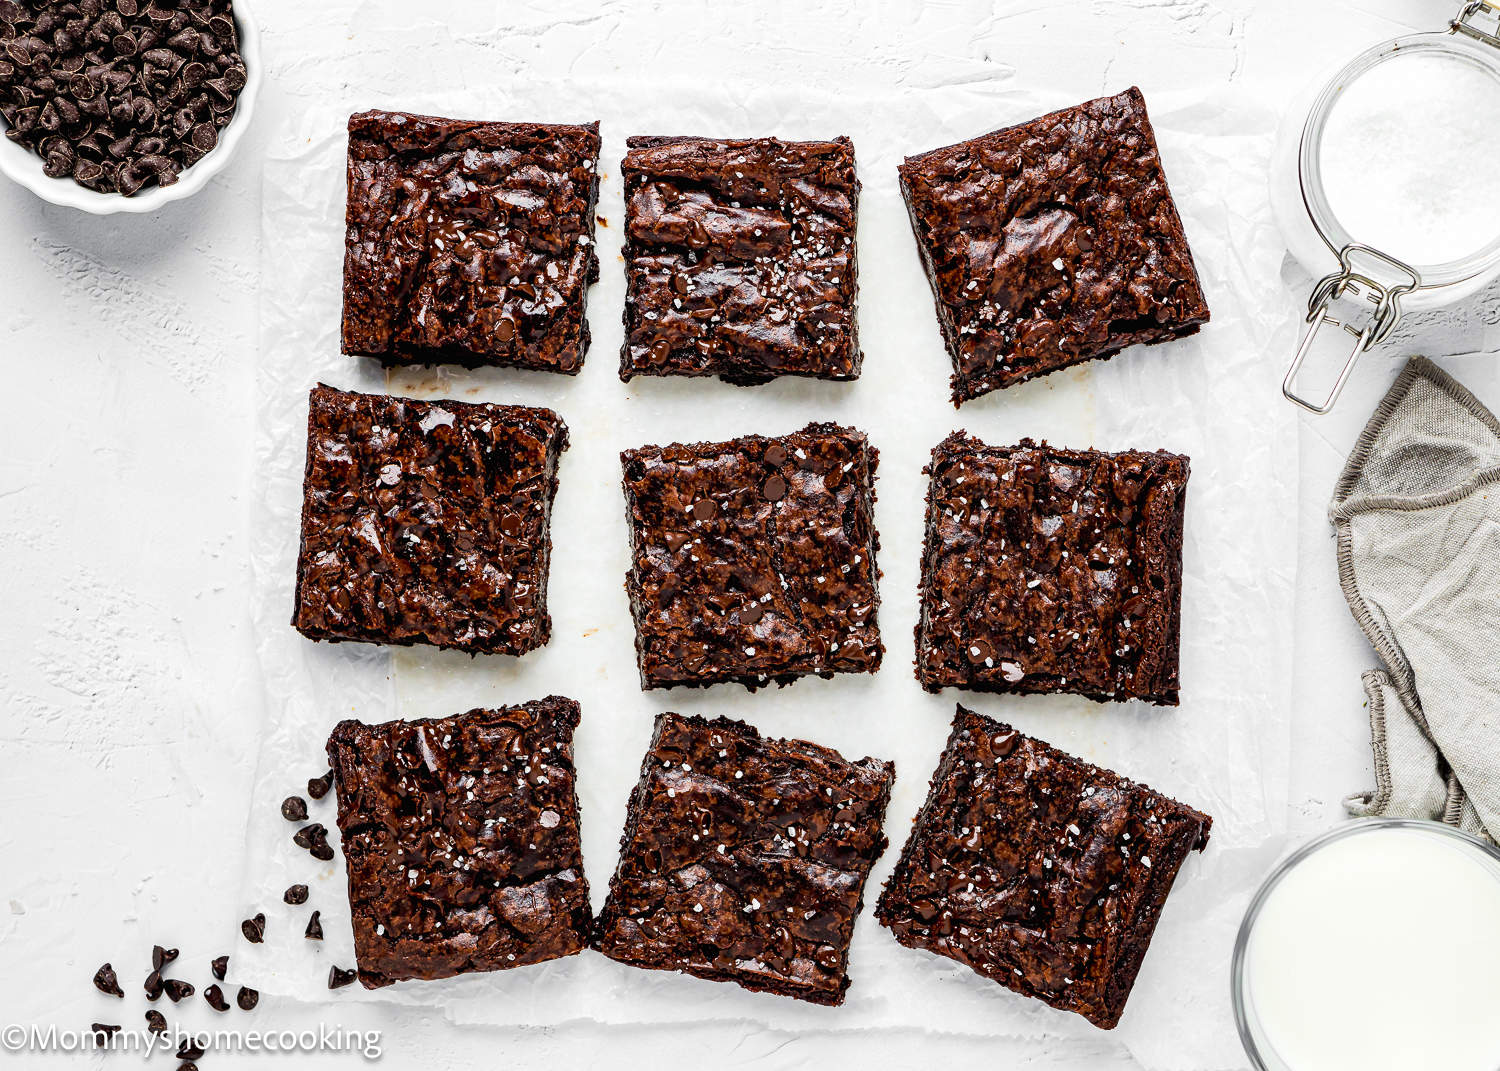 Six squares of boxed eggless brownies on a sheet of paper.